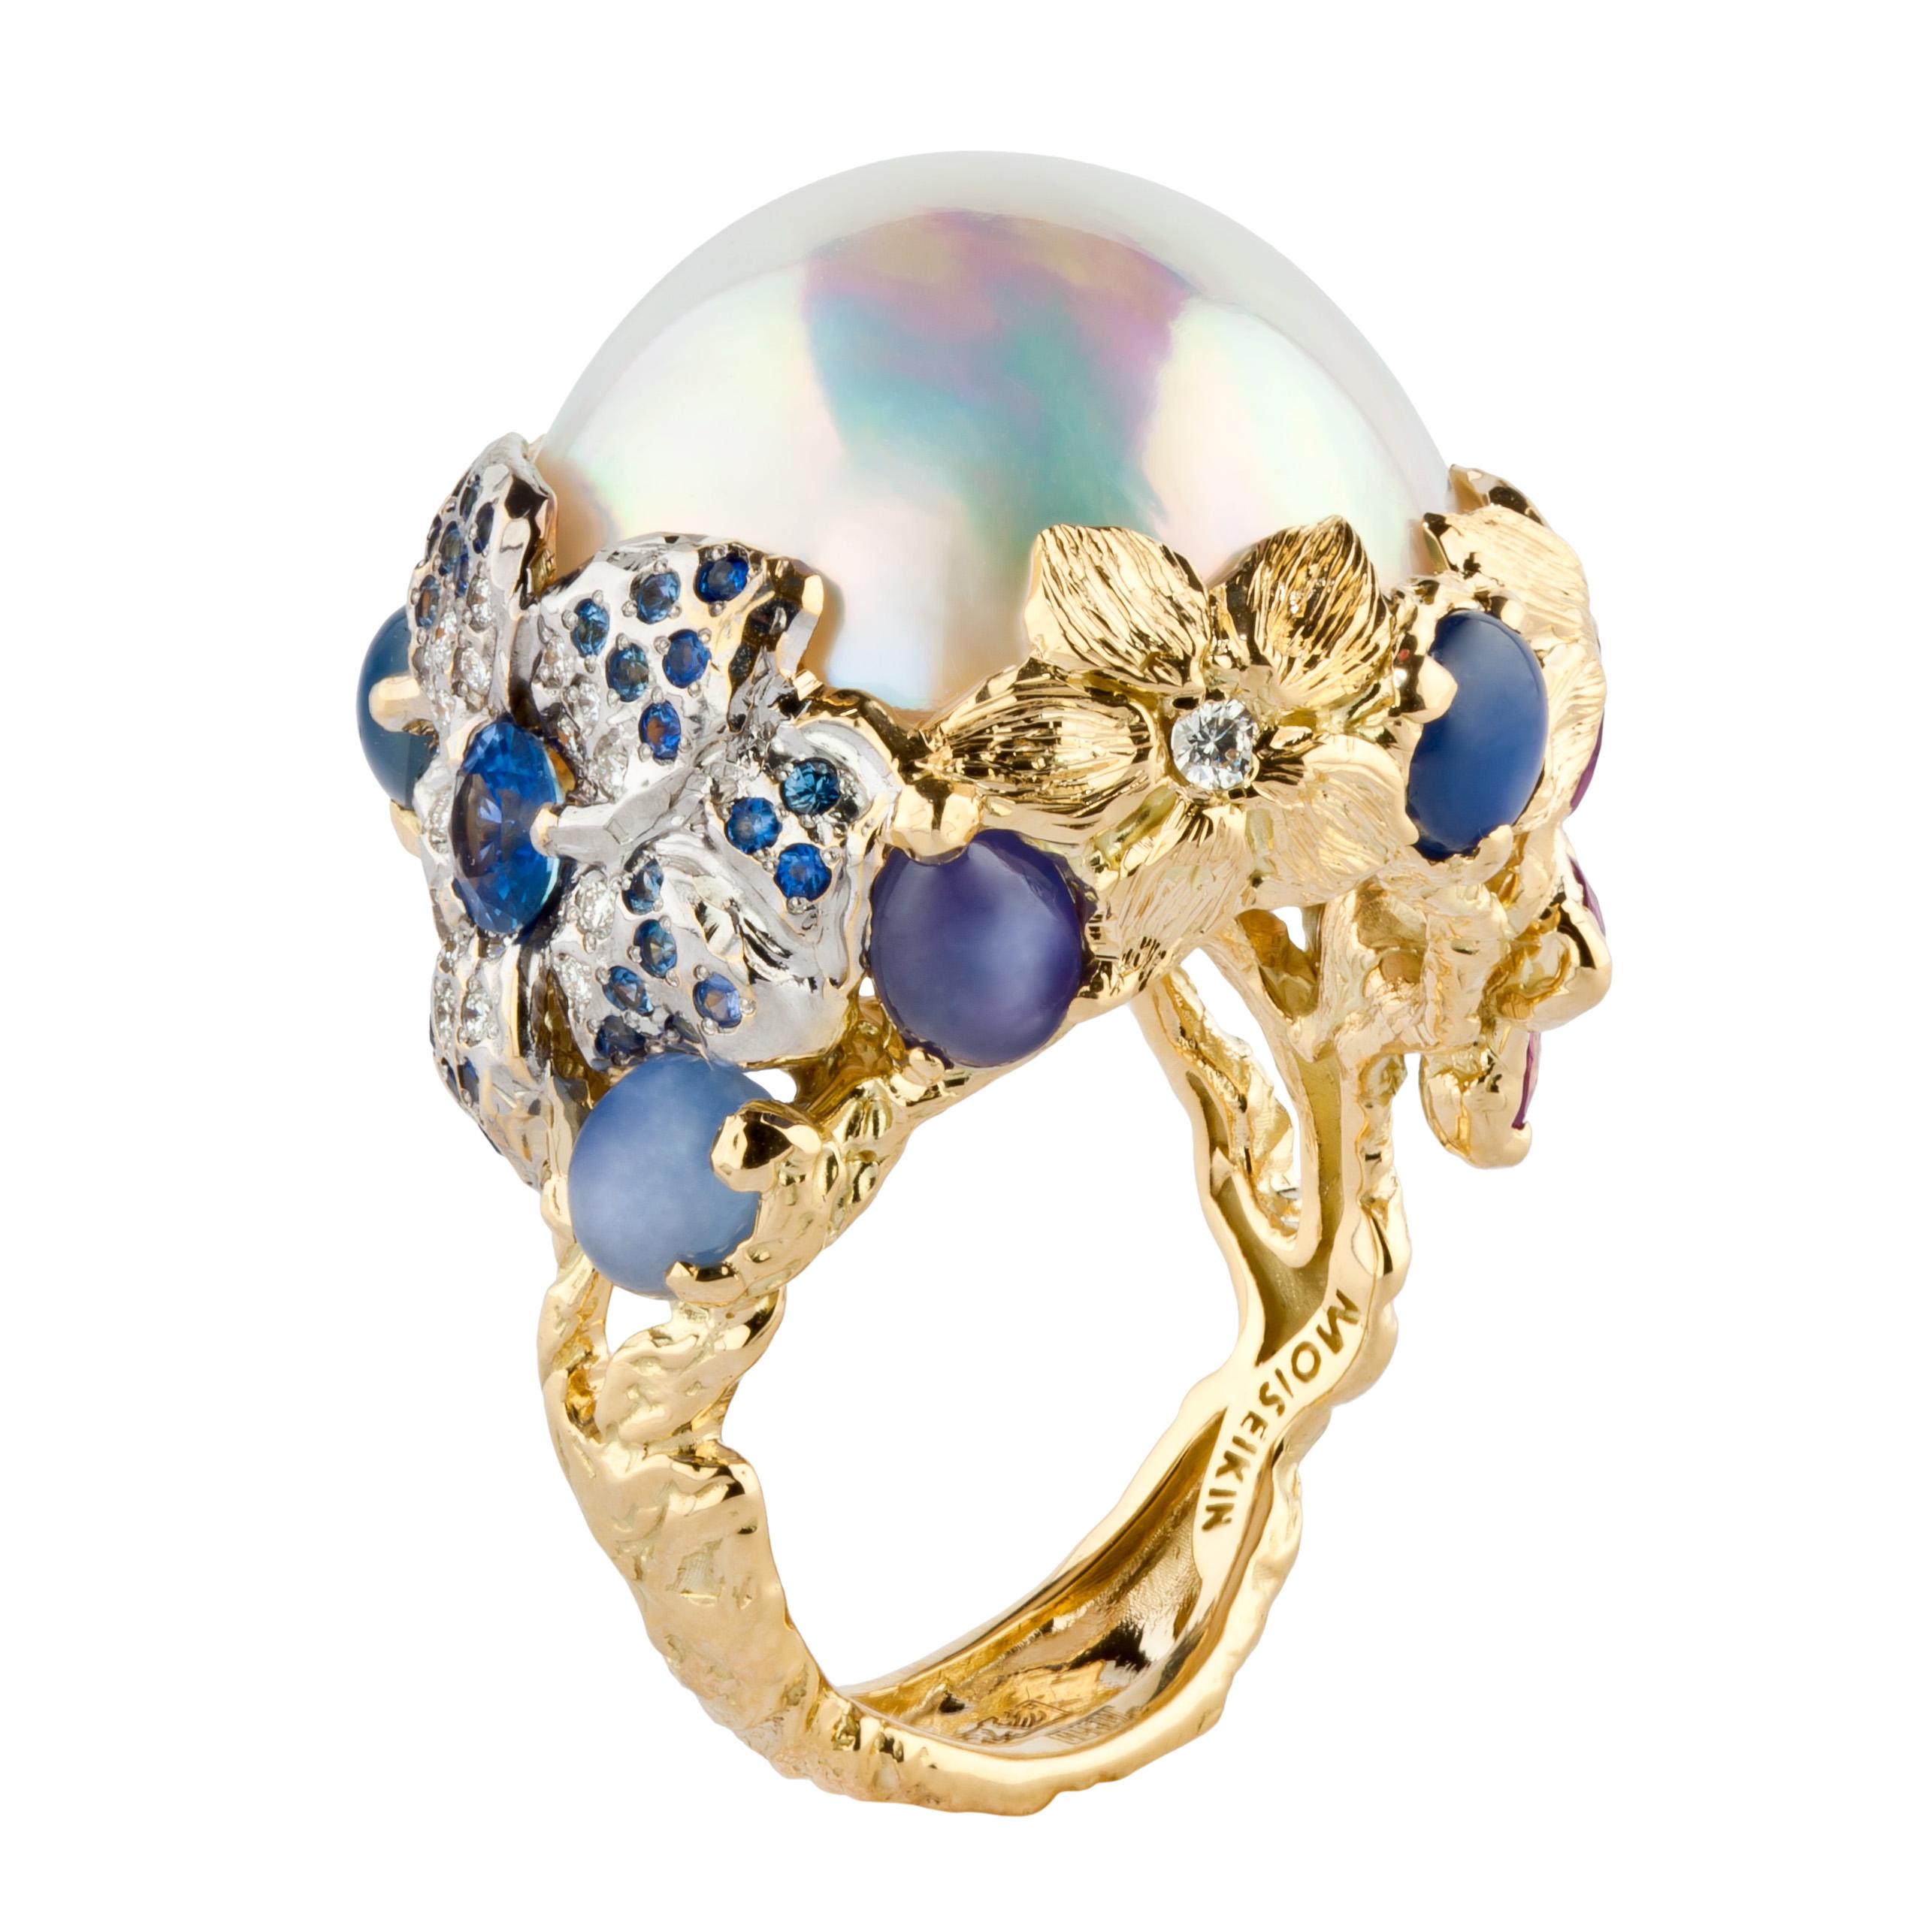 20mm size breath-takingly beautiful Mabe Pearl is artistically mounted in tender flower design decorated with cut blue sapphires, pink sapphires and star sapphires. The shimmer with a rainbow effect captures your eyes while  comforting your mood, 